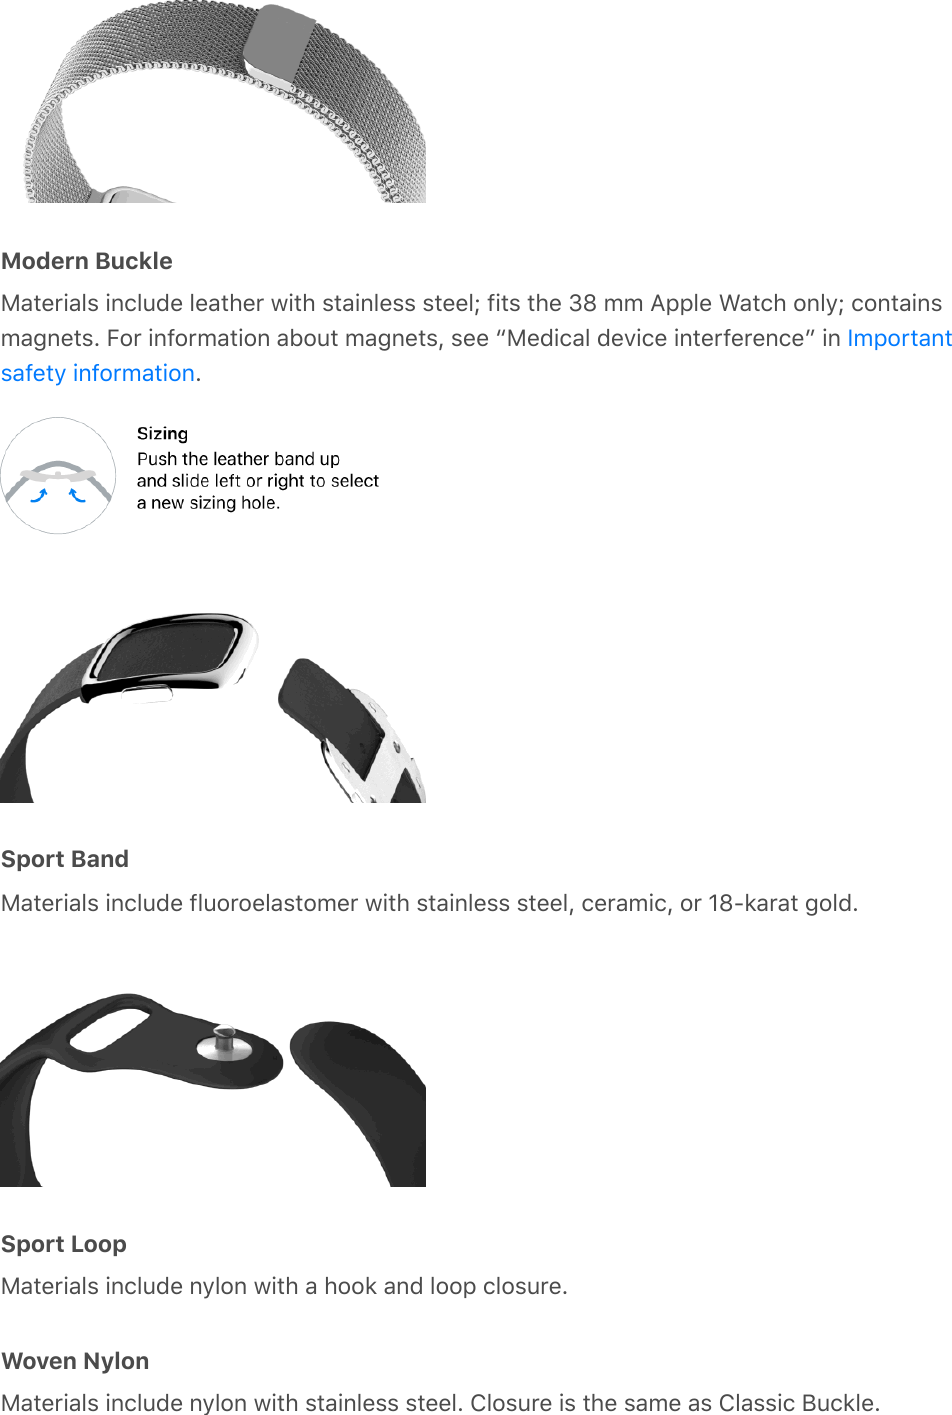 Modern BuckleMaterials include leather with stainless steel; fits the 38 mm Apple Watch only; containsmagnets. For information about magnets, see “Medical device interference” in .Sport BandMaterials include fluoroelastomer with stainless steel, ceramic, or 18-karat gold.Sport LoopMaterials include nylon with a hook and loop closure.Woven NylonMaterials include nylon with stainless steel. Closure is the same as Classic Buckle.Importantsafety information